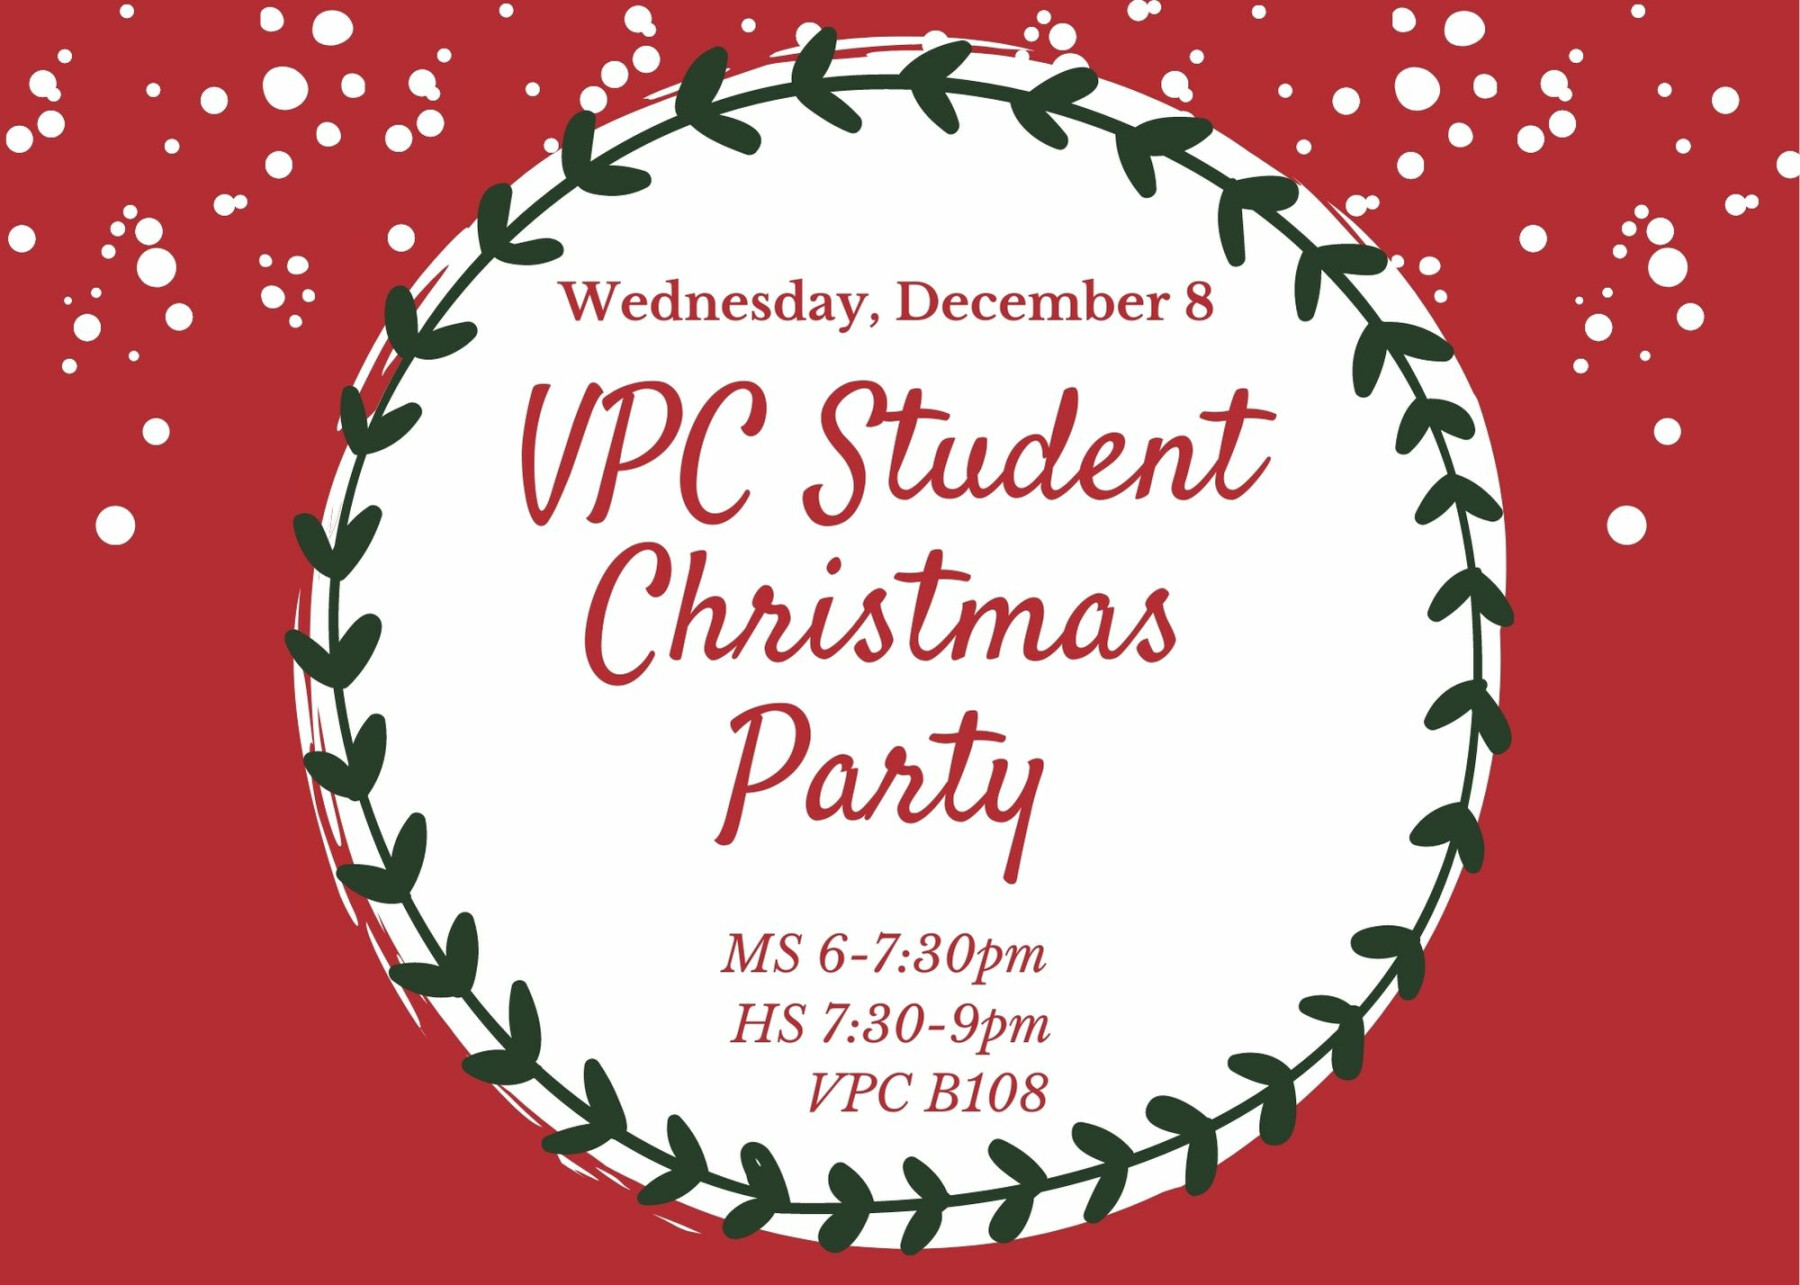 VPC Student Christmas Party